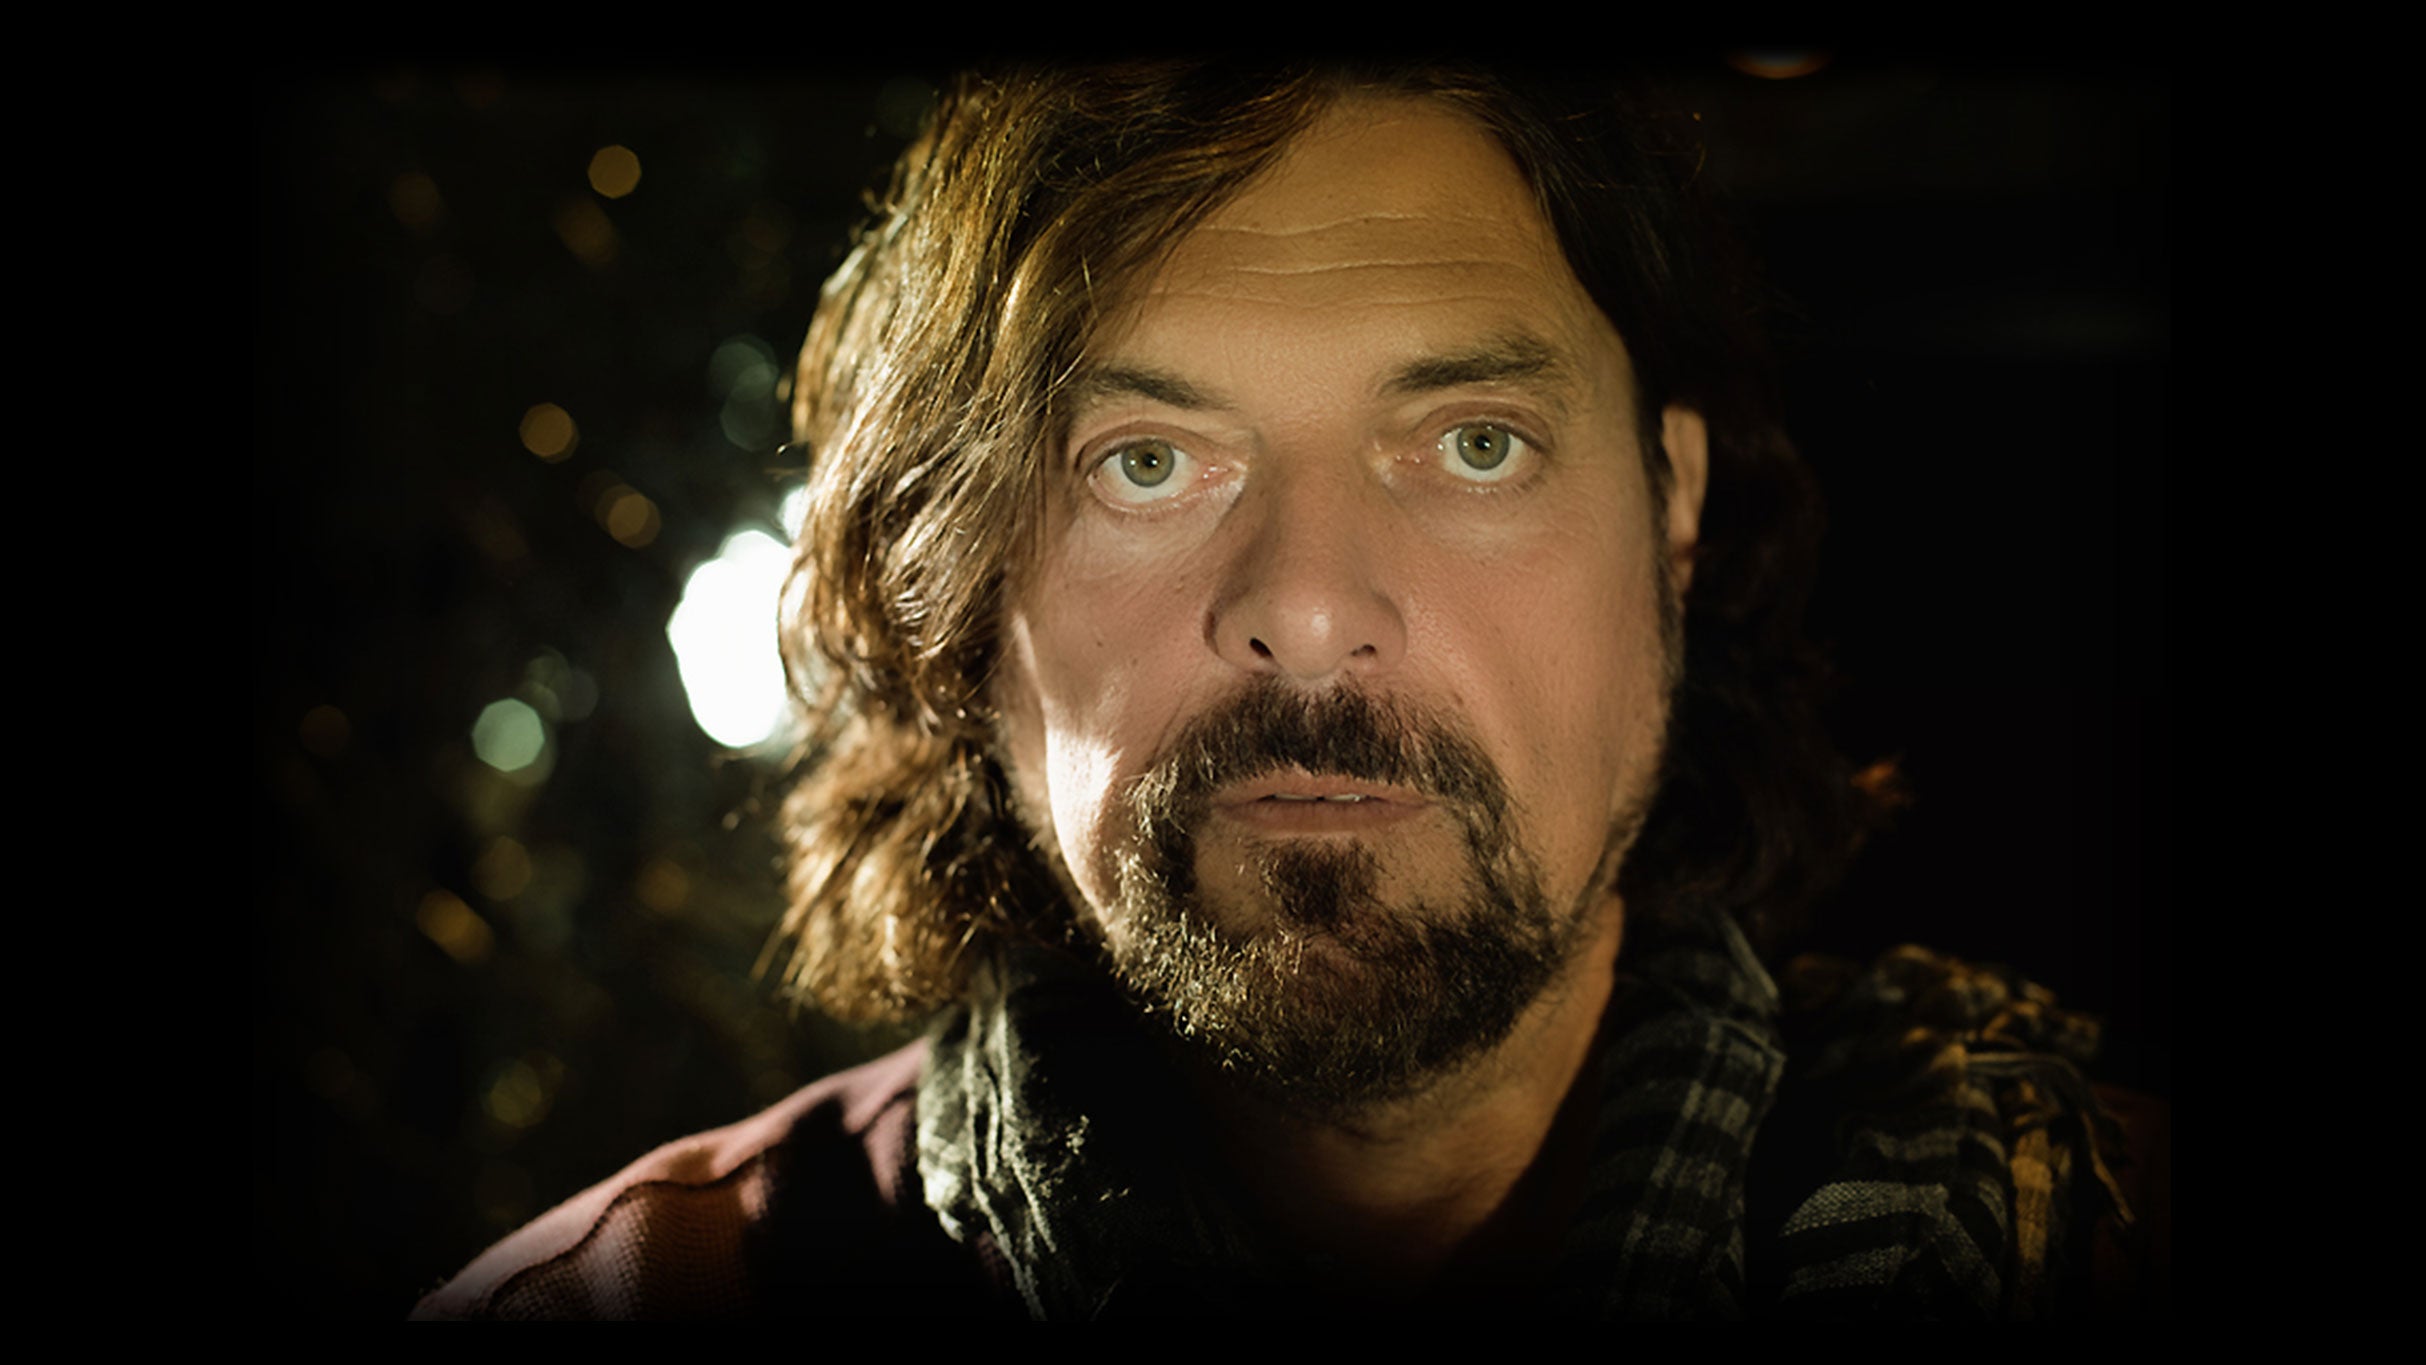 An Evening With Alan Parsons Live Project: Reset and Power Back On free presale c0de for early tickets in Oakland